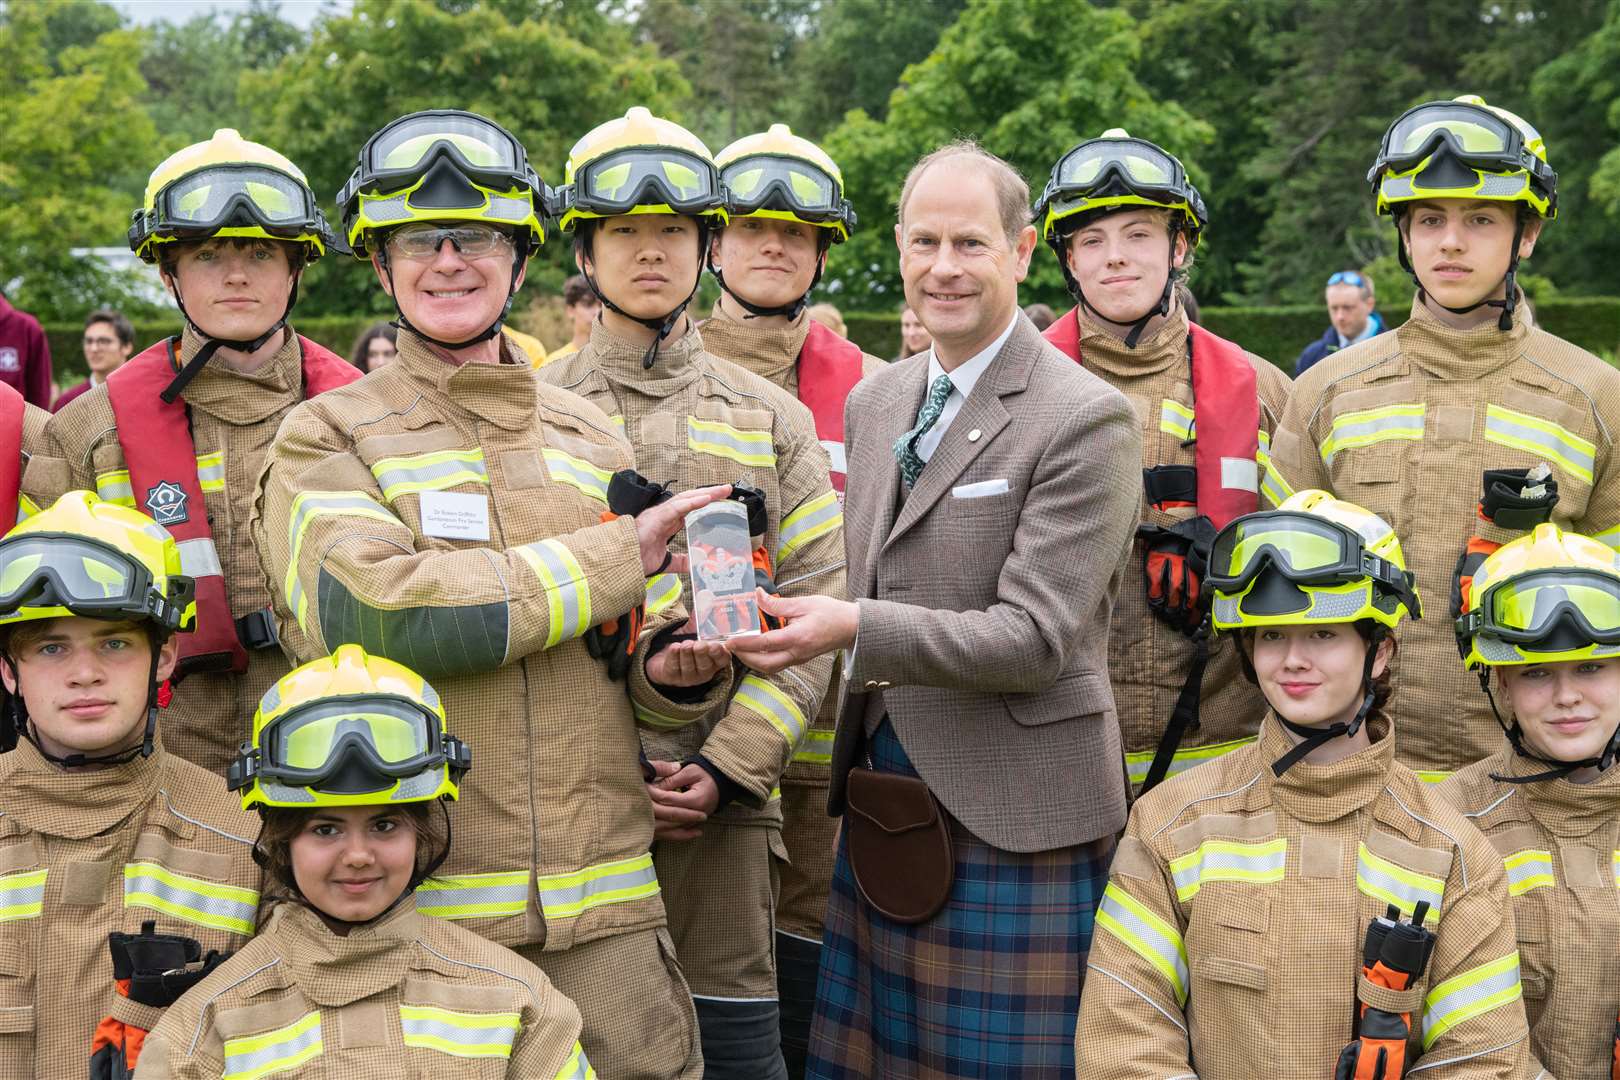 The Earl of Forfar presents Dr Robert Griffiths, Gordon Fire Service Commander, with the Queen's Award for Voluntary Service...Prince Edward and Sophie, known as the Earl and Countess of Forfar when visiting Scotland, spend time at Gordonstoun School during their visit to Moray...Picture: Daniel Forsyth..